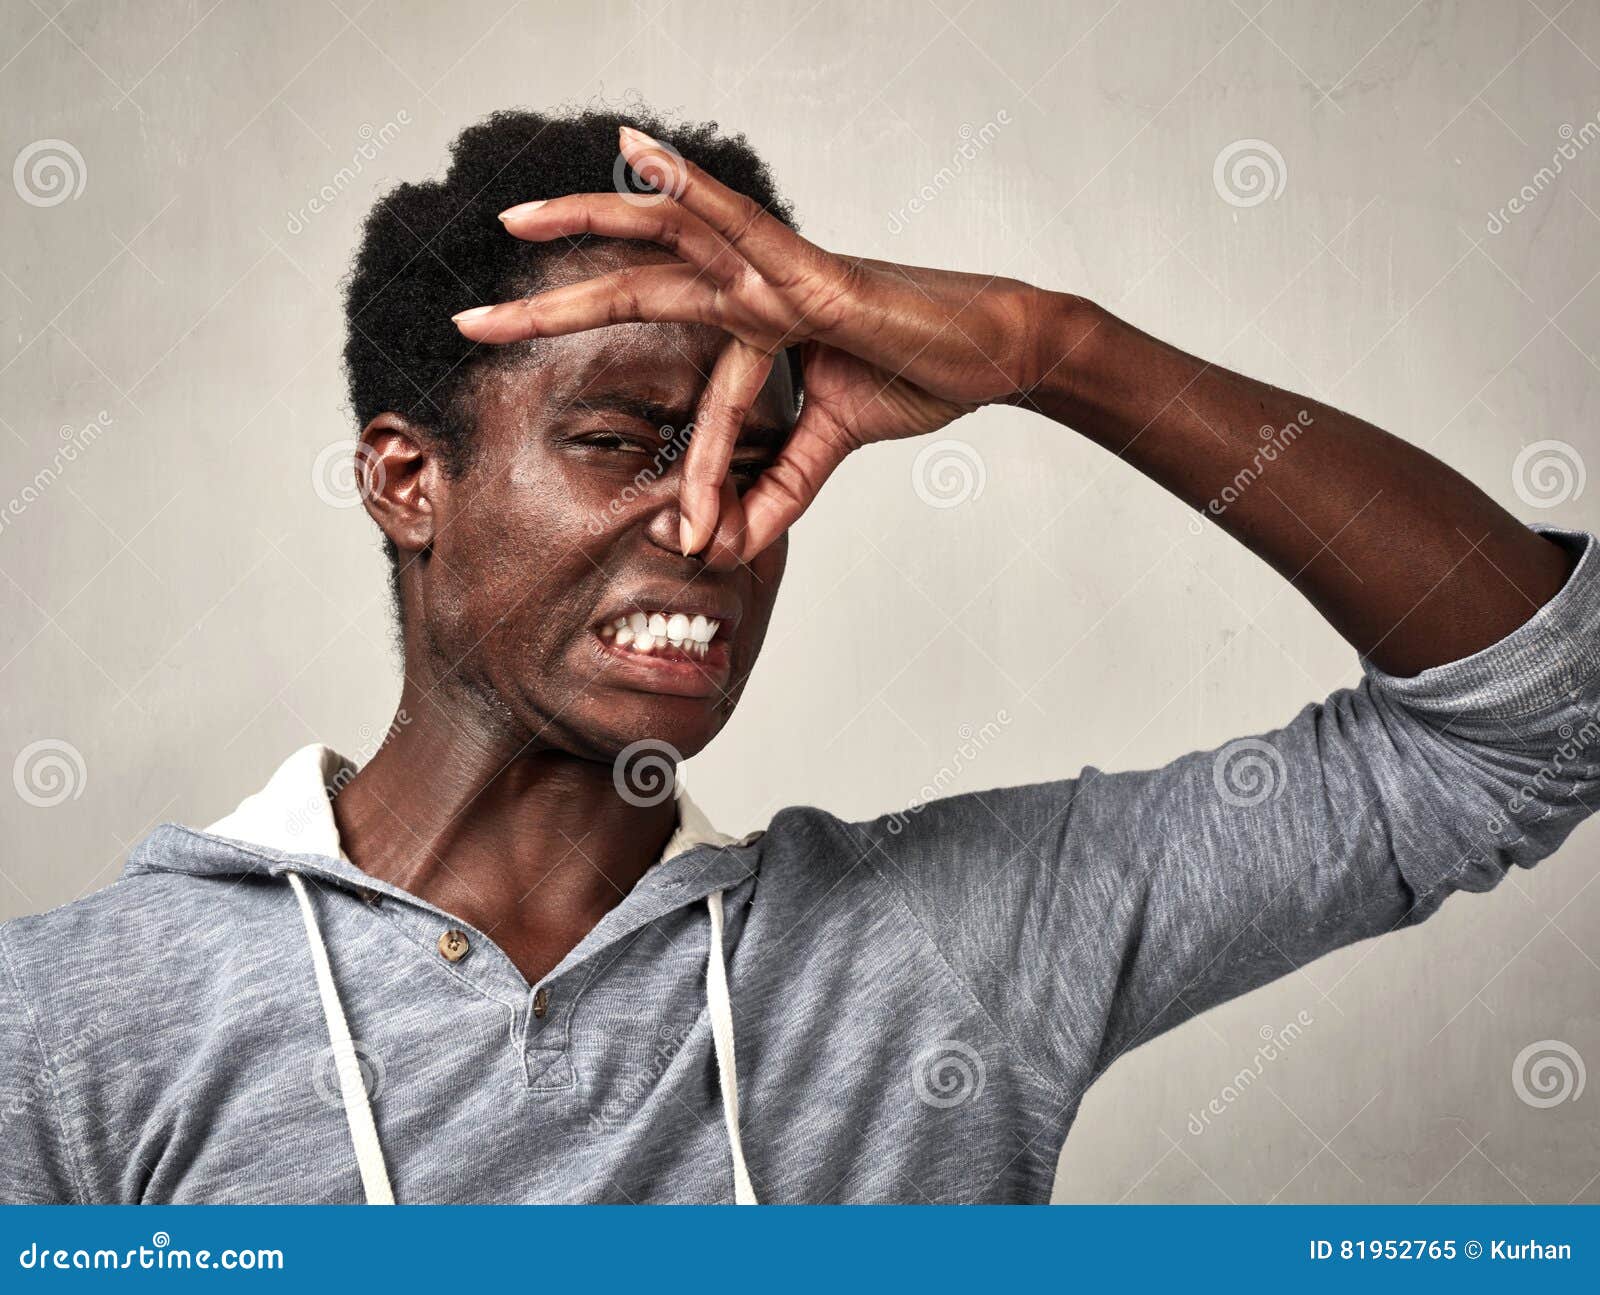 Man disgusted stock image. Image of afroamerican, male - 81952765